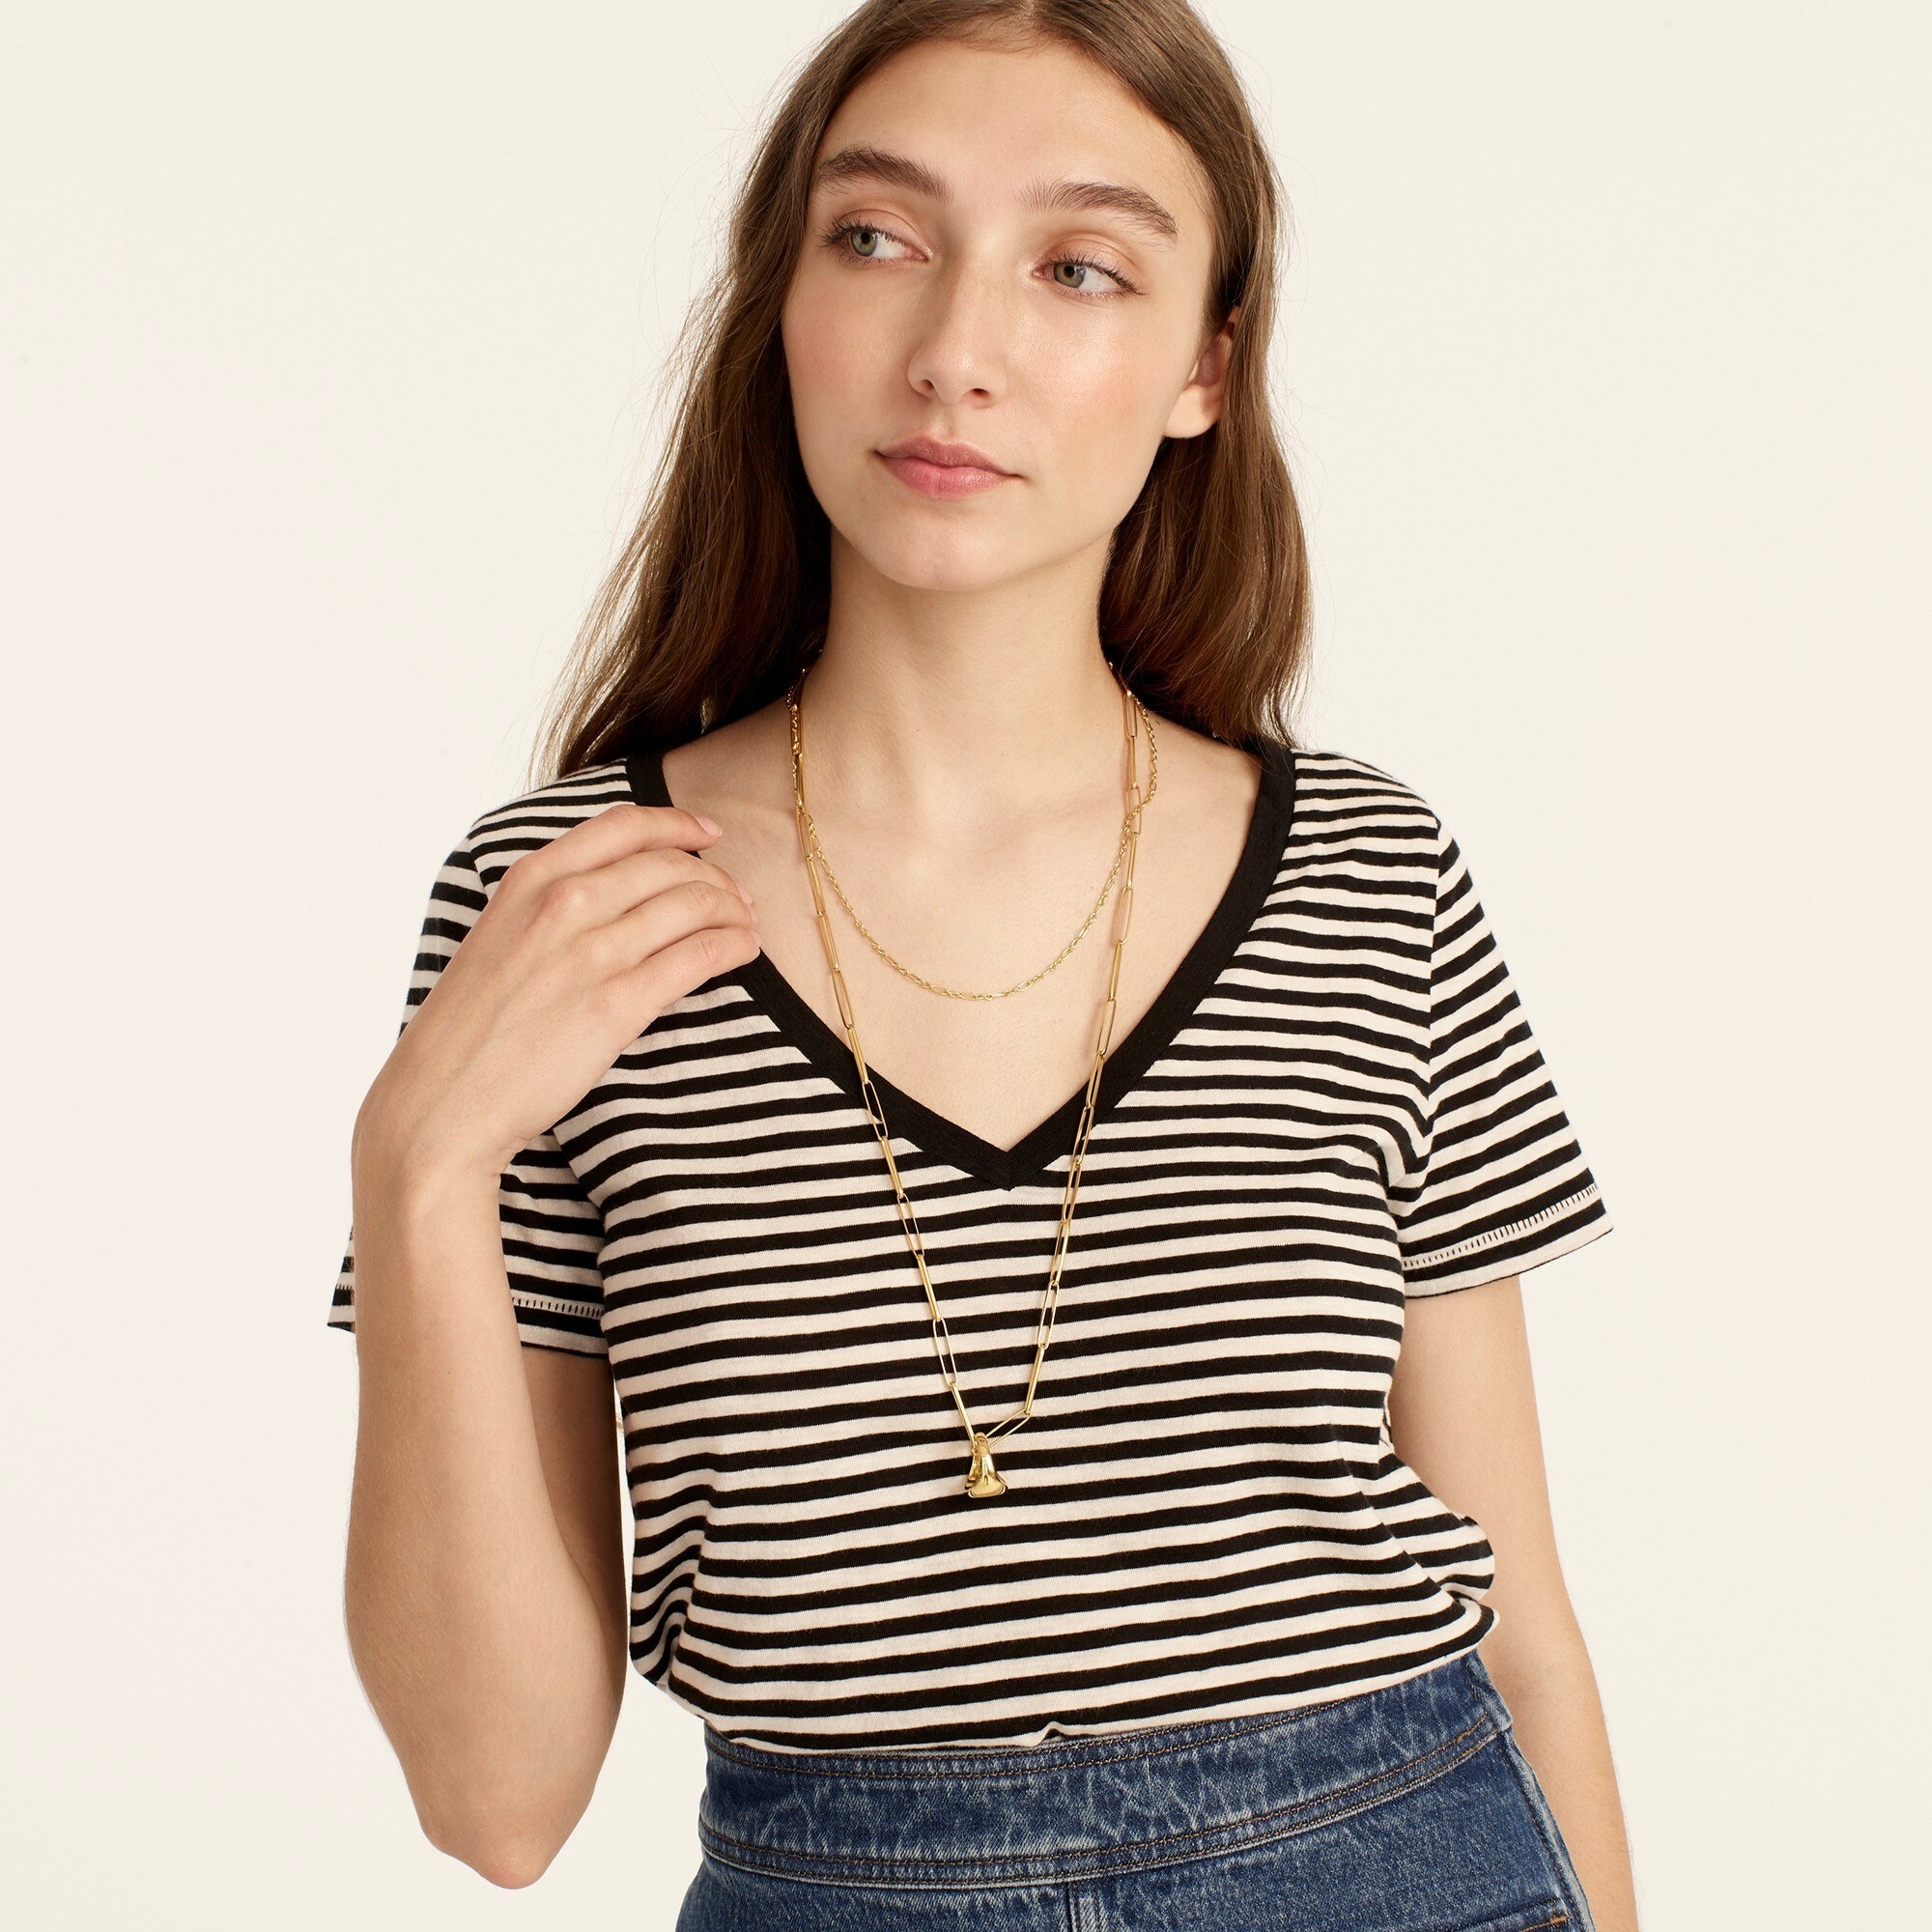 An image of a model wearing a striped, V-neck tee